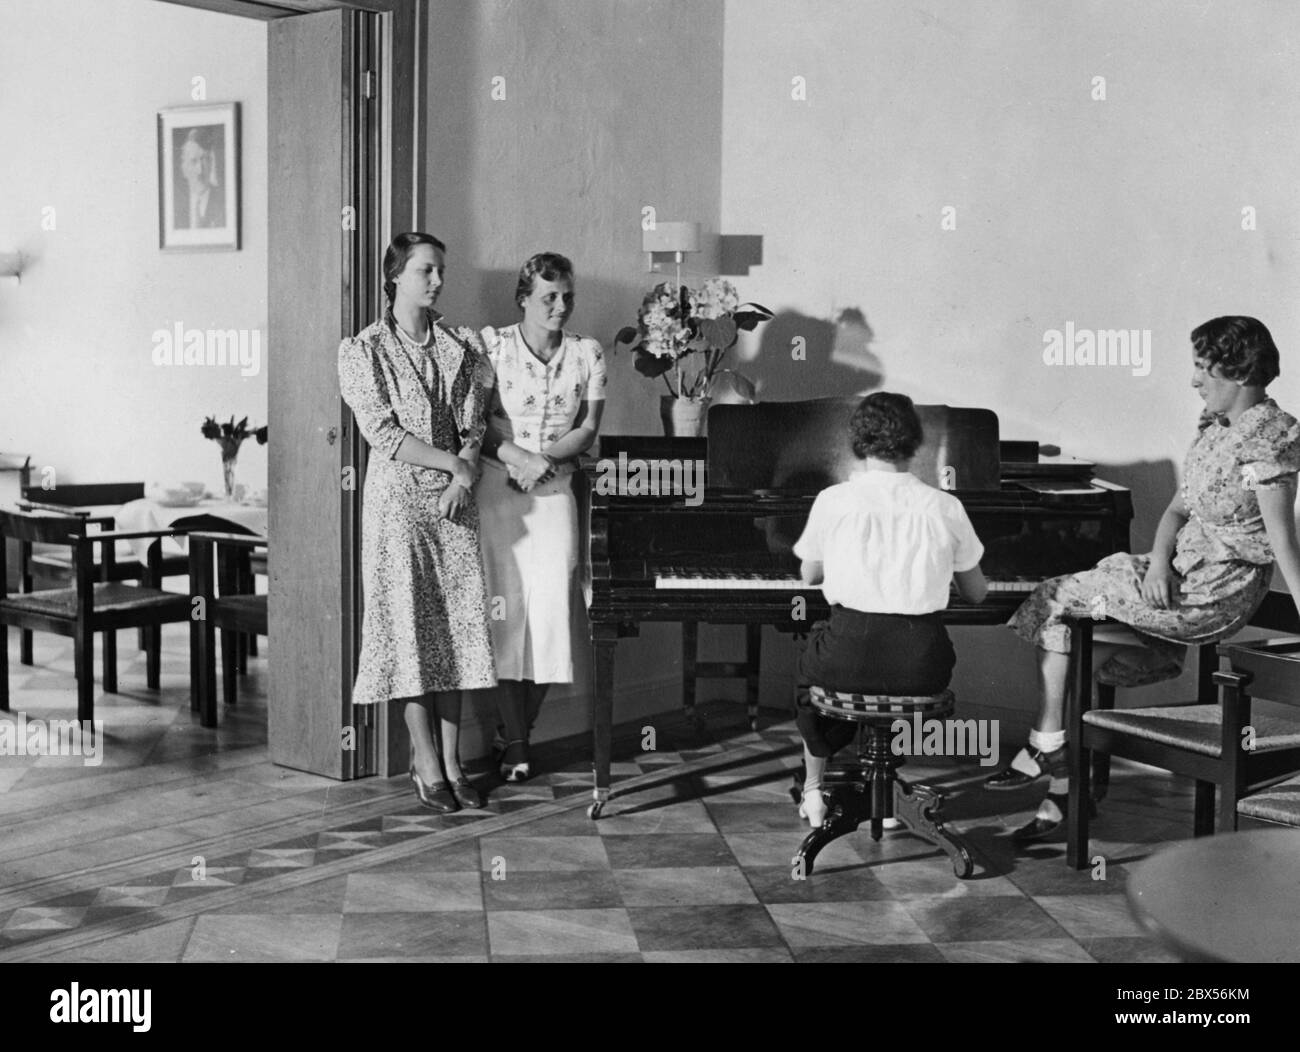 Students of the Labor Association of National Socialist Female Students (Arbeitsgemeinschaft nationalsozialistischer Studentinnen)  in the music room of their new dormitory in Berlin C, Oranienburgerstrasse 19. On the left wall is a portrait of Adolf Hitler. Stock Photo